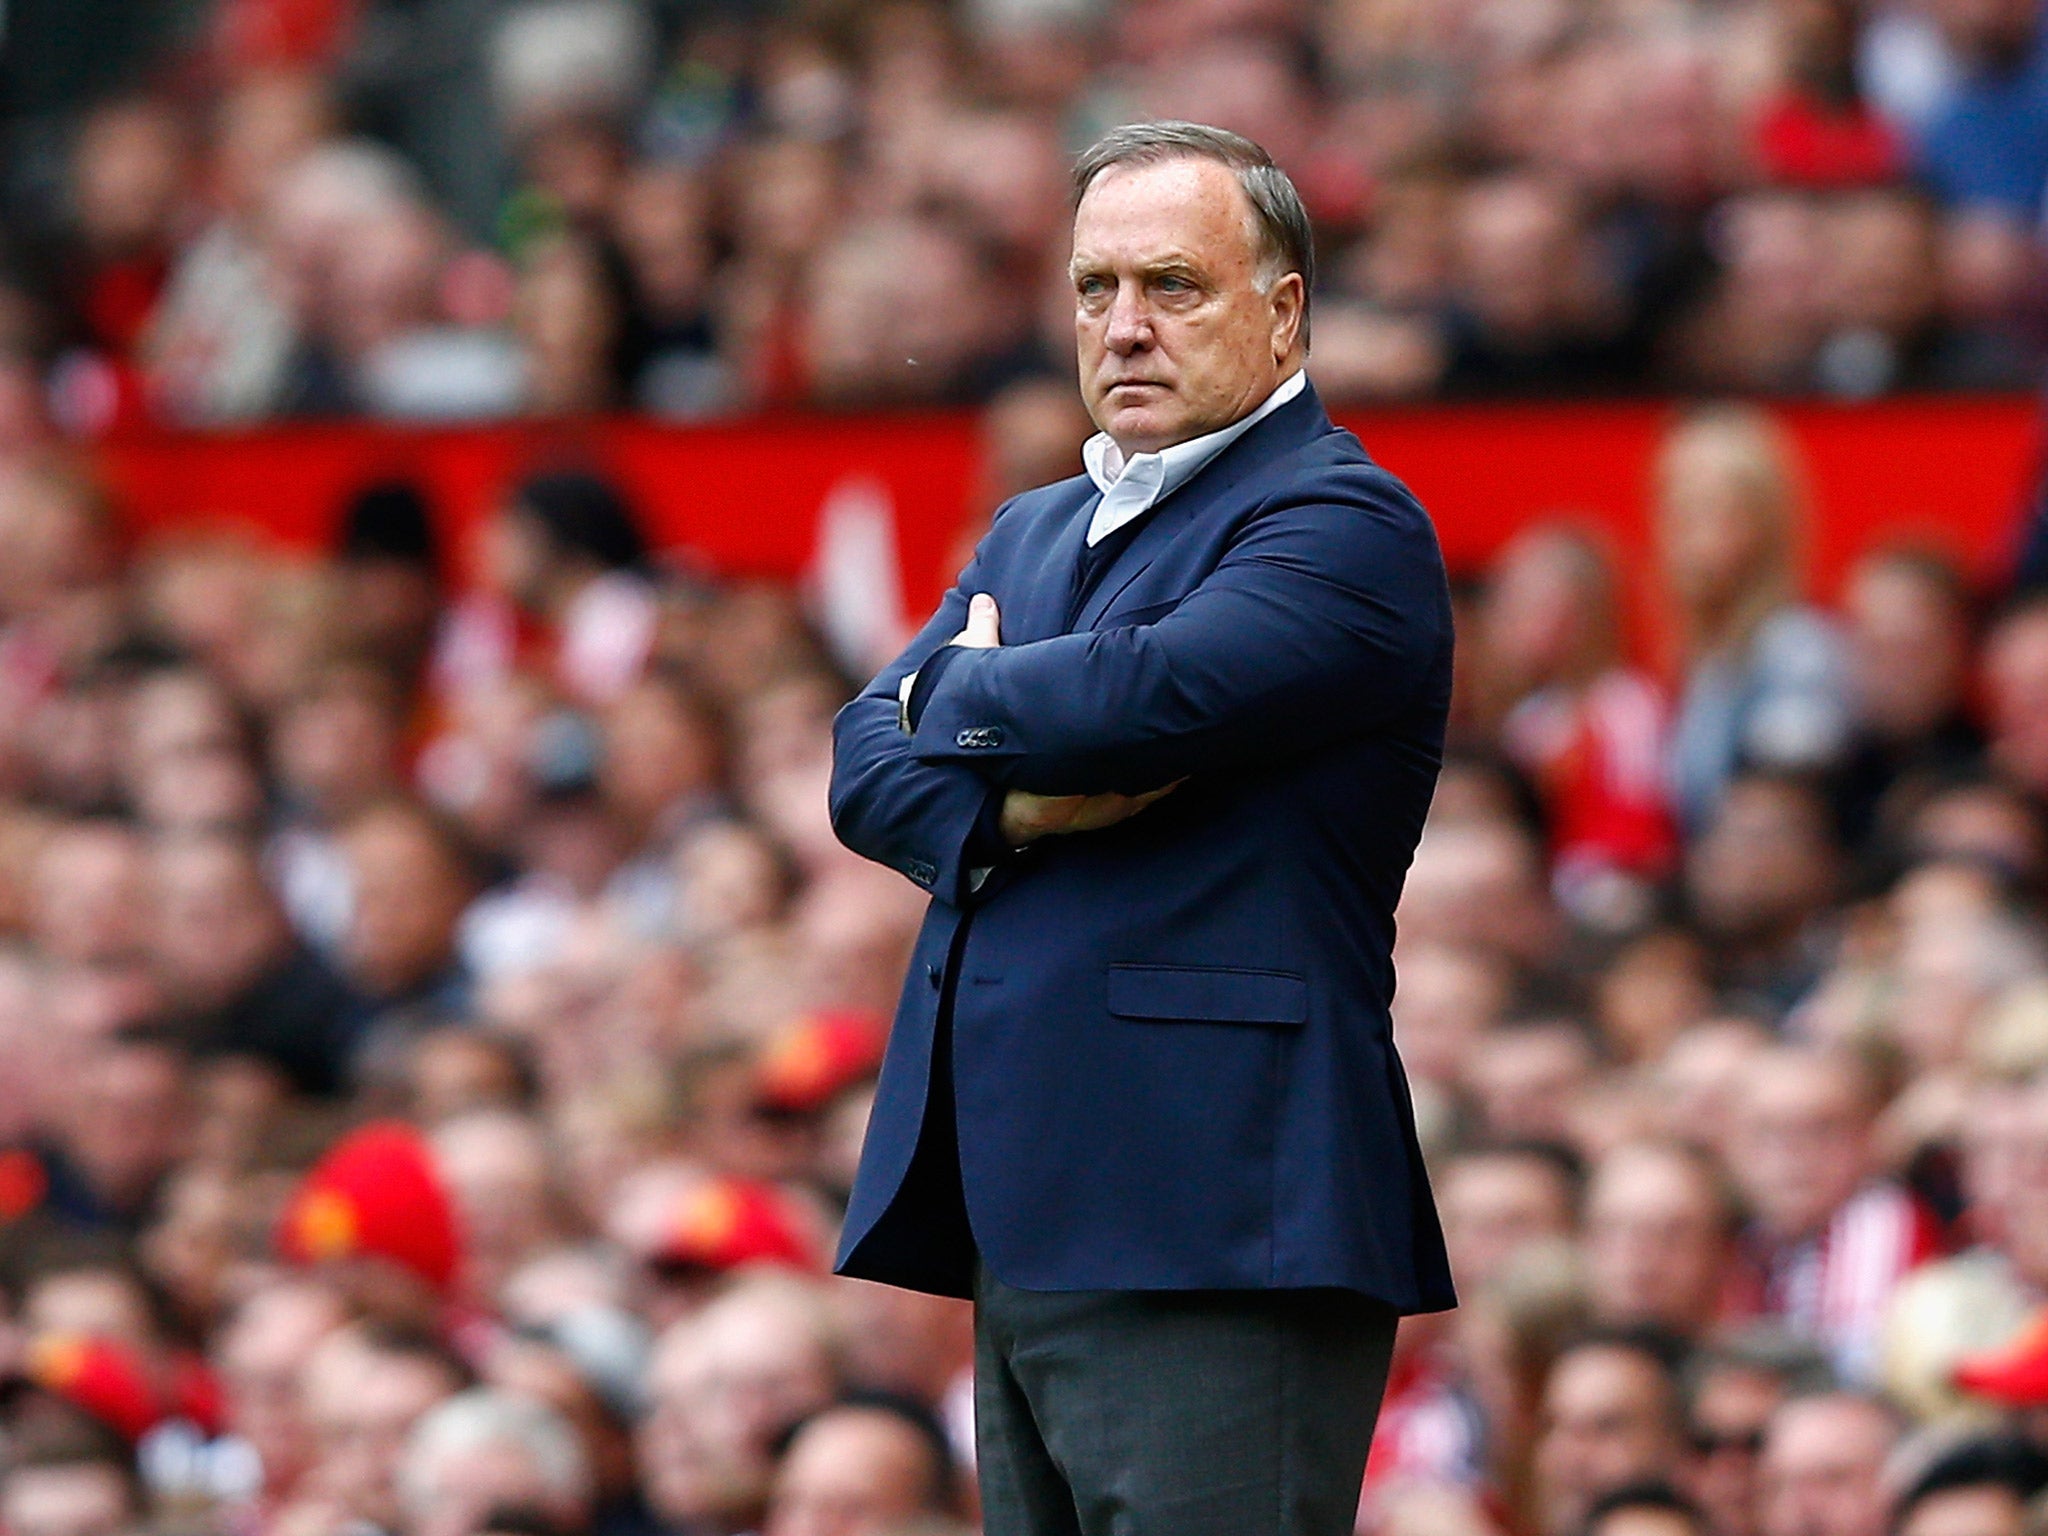 Advocaat on the touchline during last week's 3-0 defeat to Manchester United